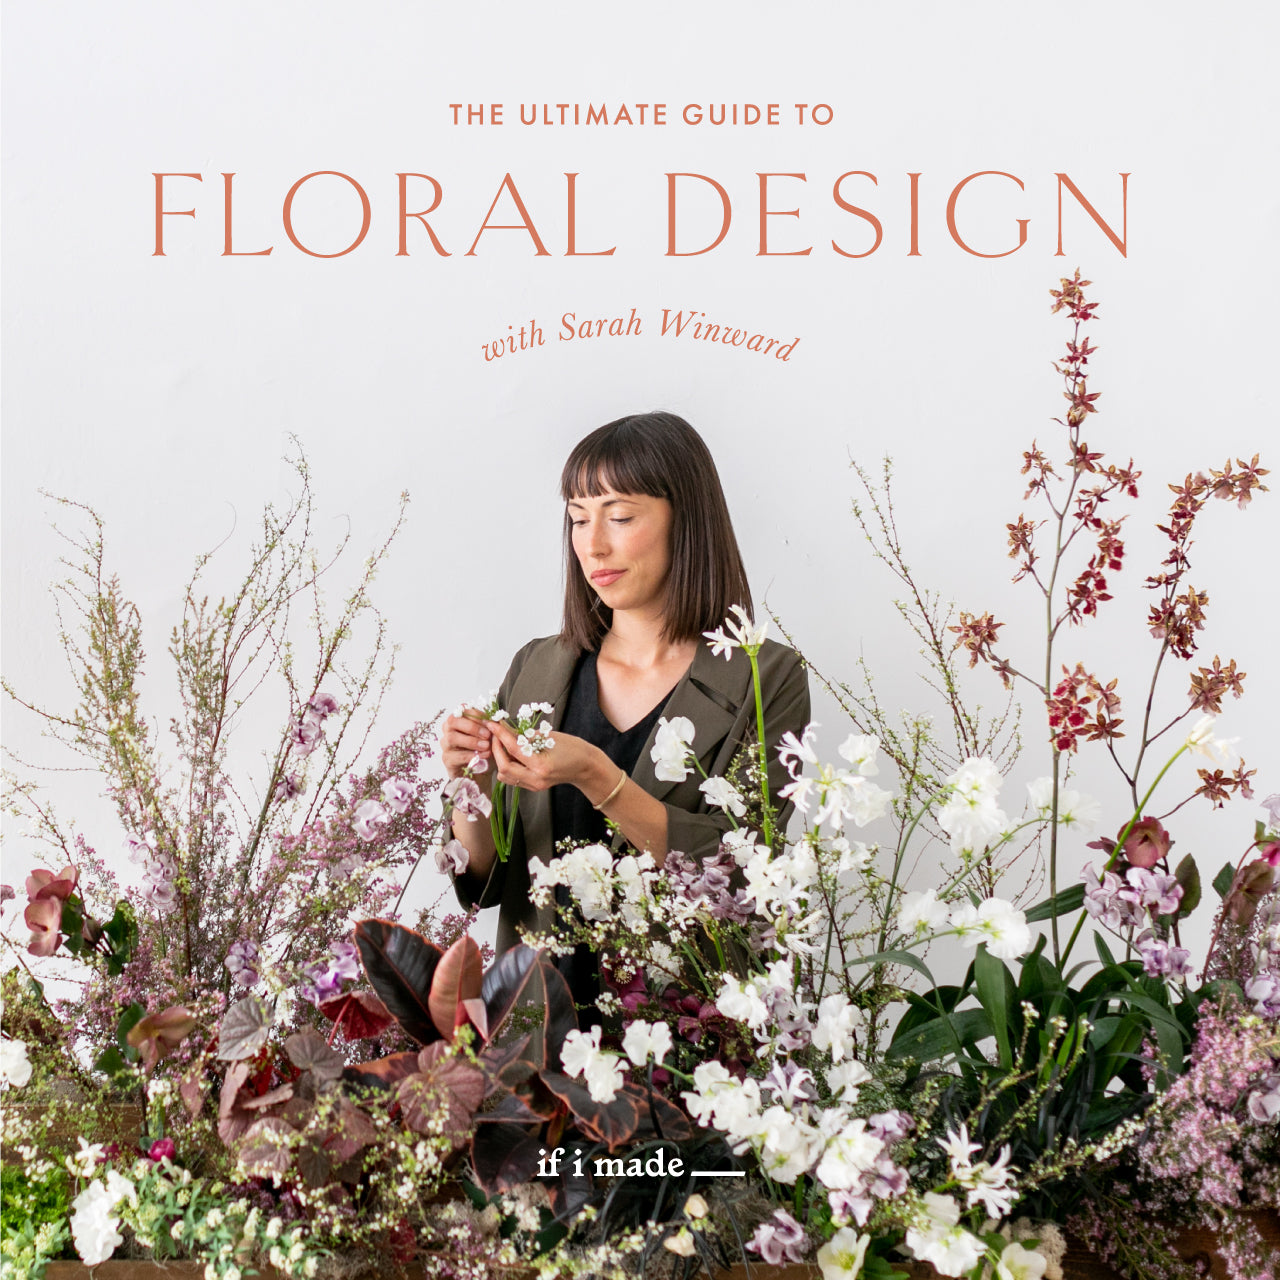 The Ultimate Guide to Wedding Floral Design with Sarah Winward (RPP) - 39 payments of $99